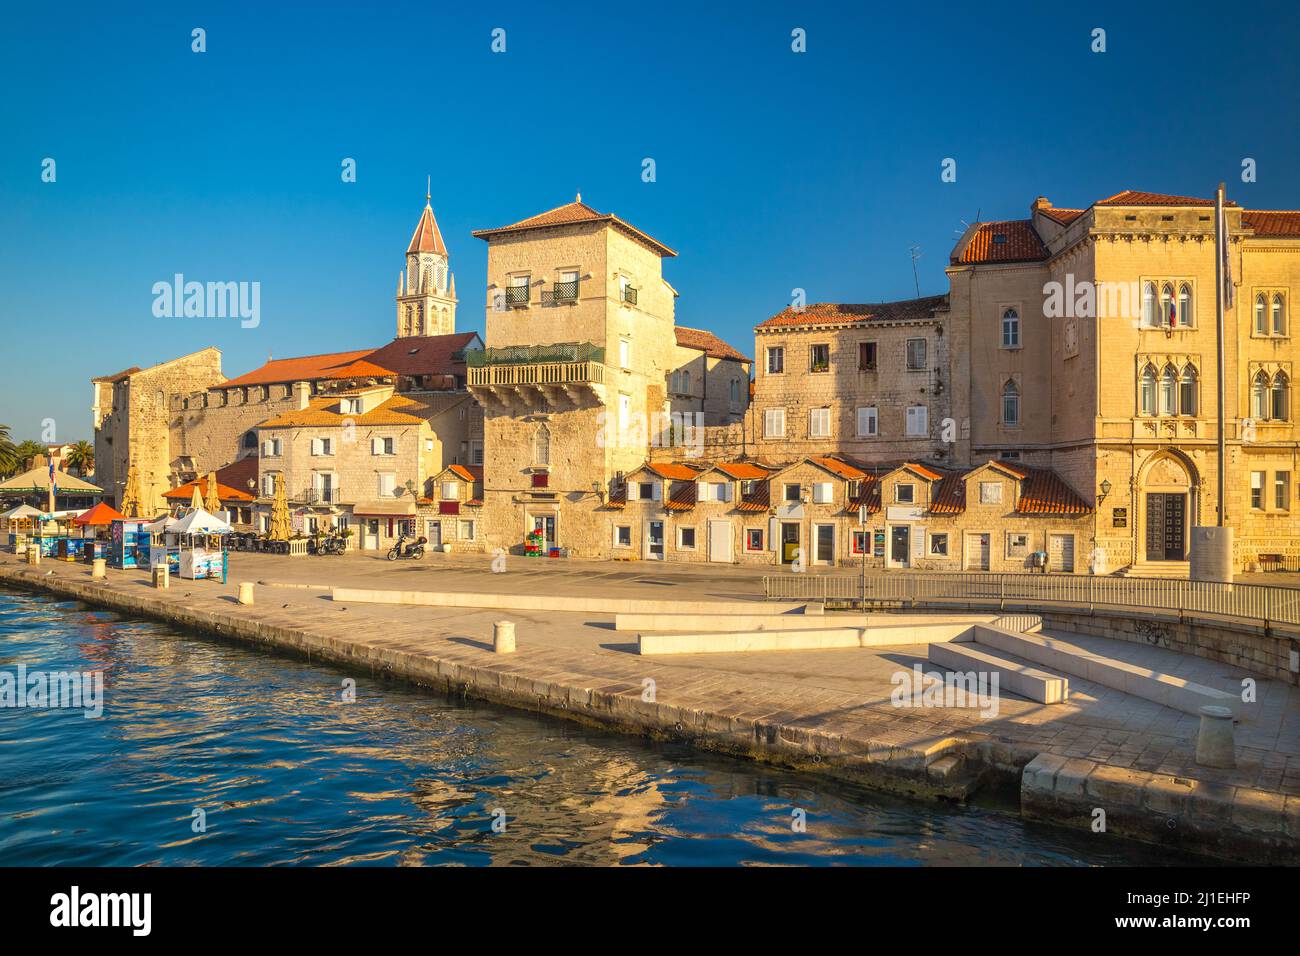 Waterfront with promenade in The Old town of Trogir, Croatia, Europe. Stock Photo